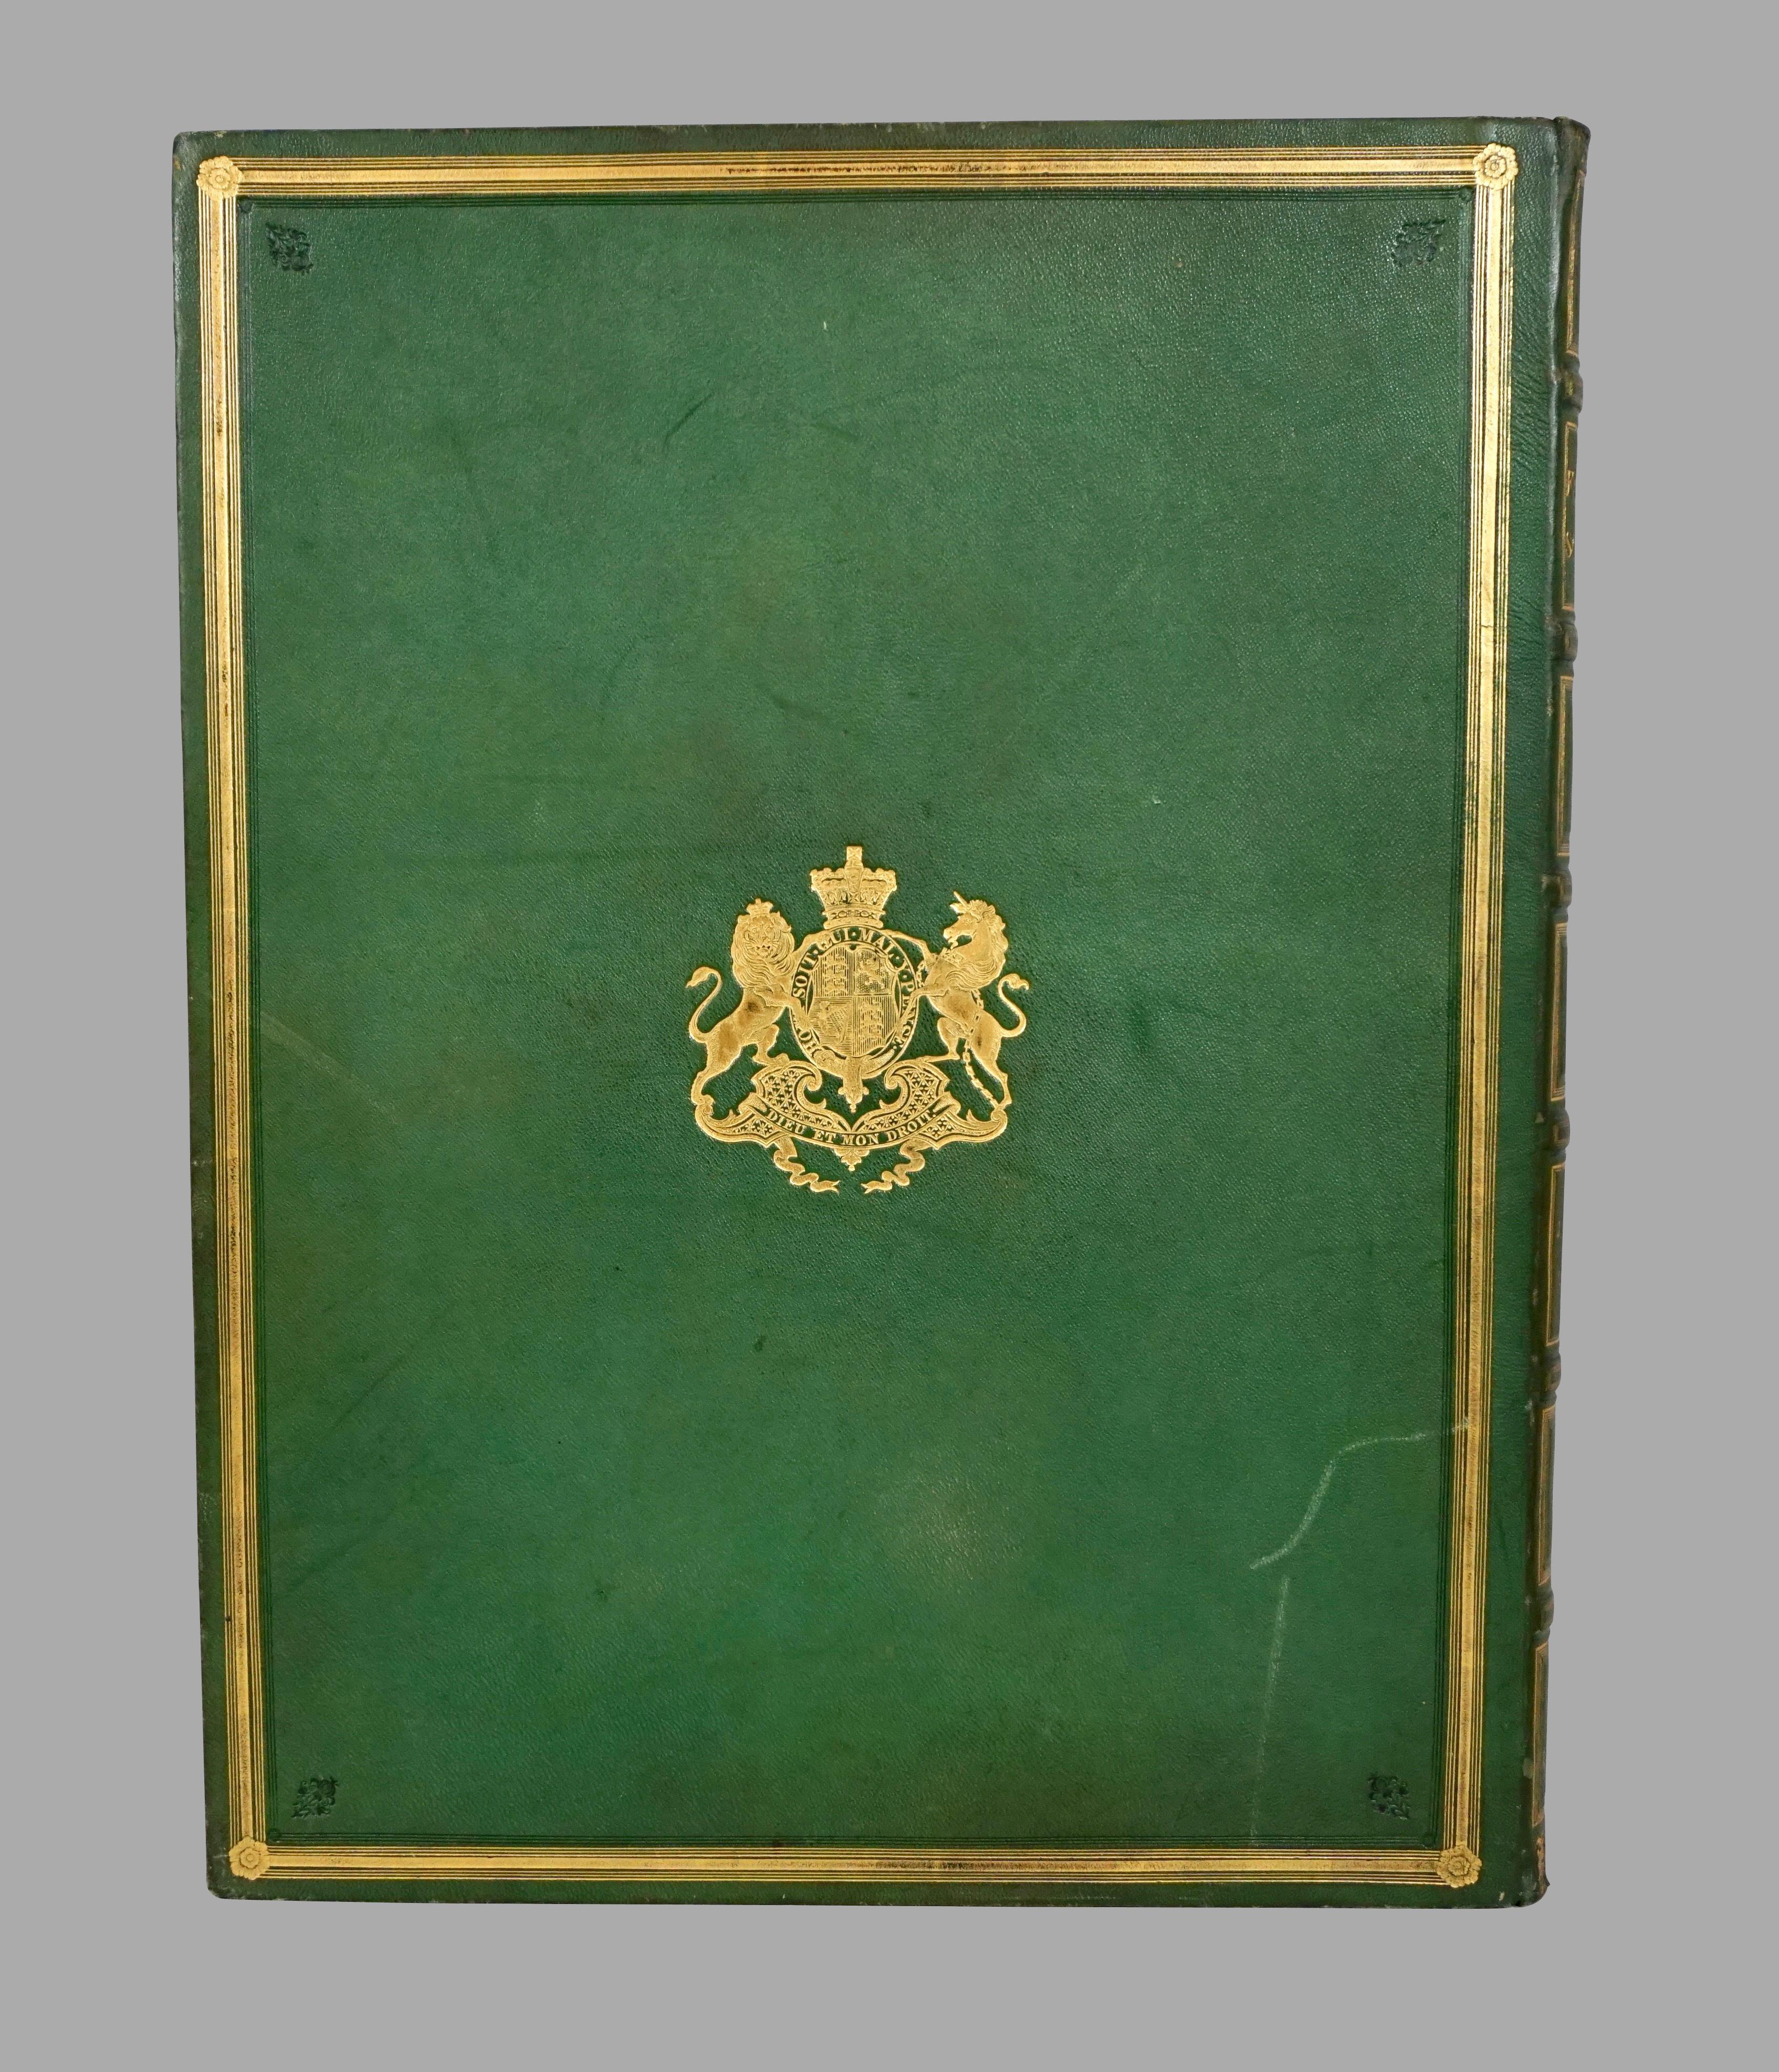 Green Morocco Leather Elephant Folio Book Cover Now A Marbleized Paper Lined Box 1